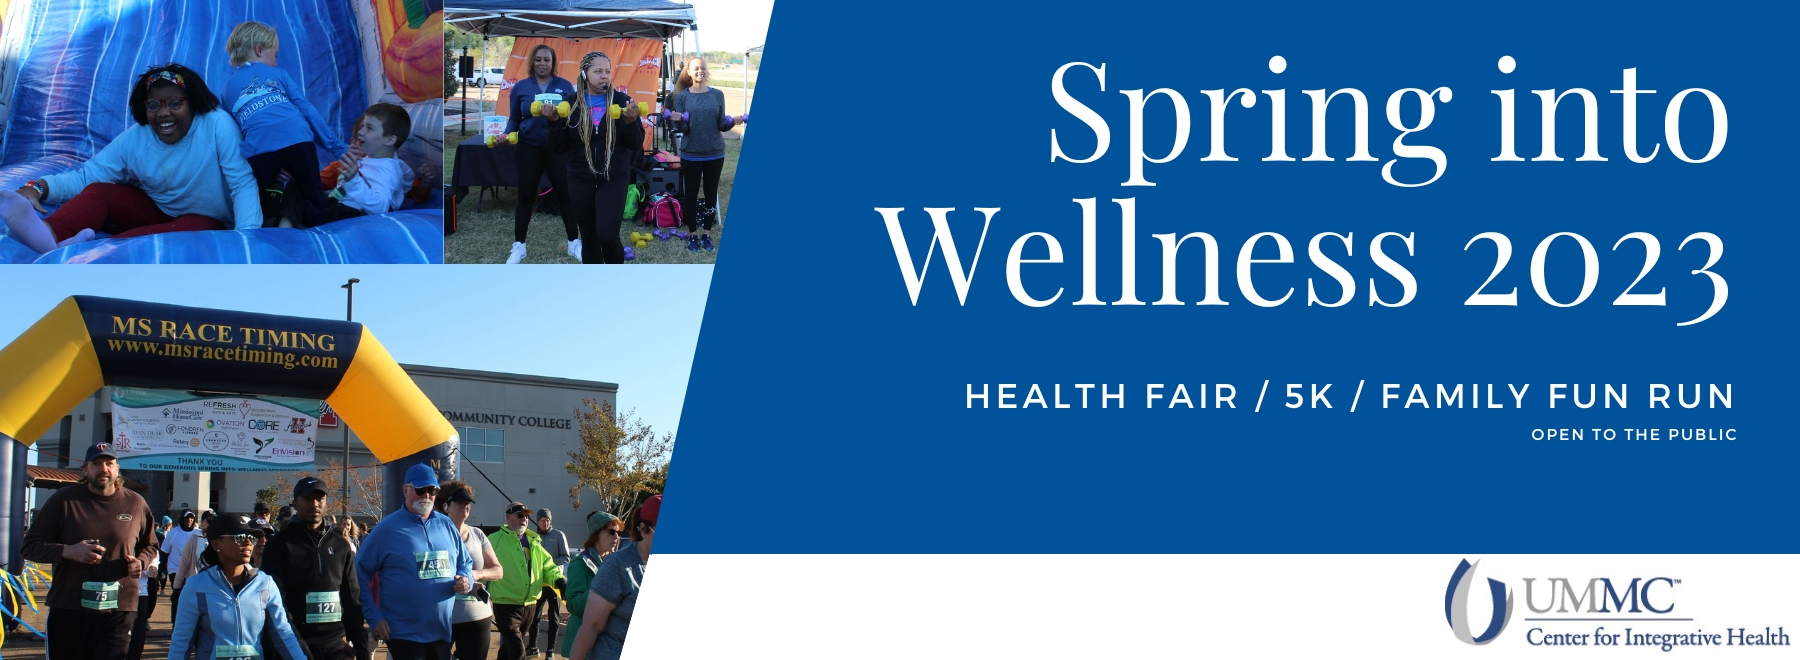 Spring into Wellness 2023, Open to the Public, April 15, 2023